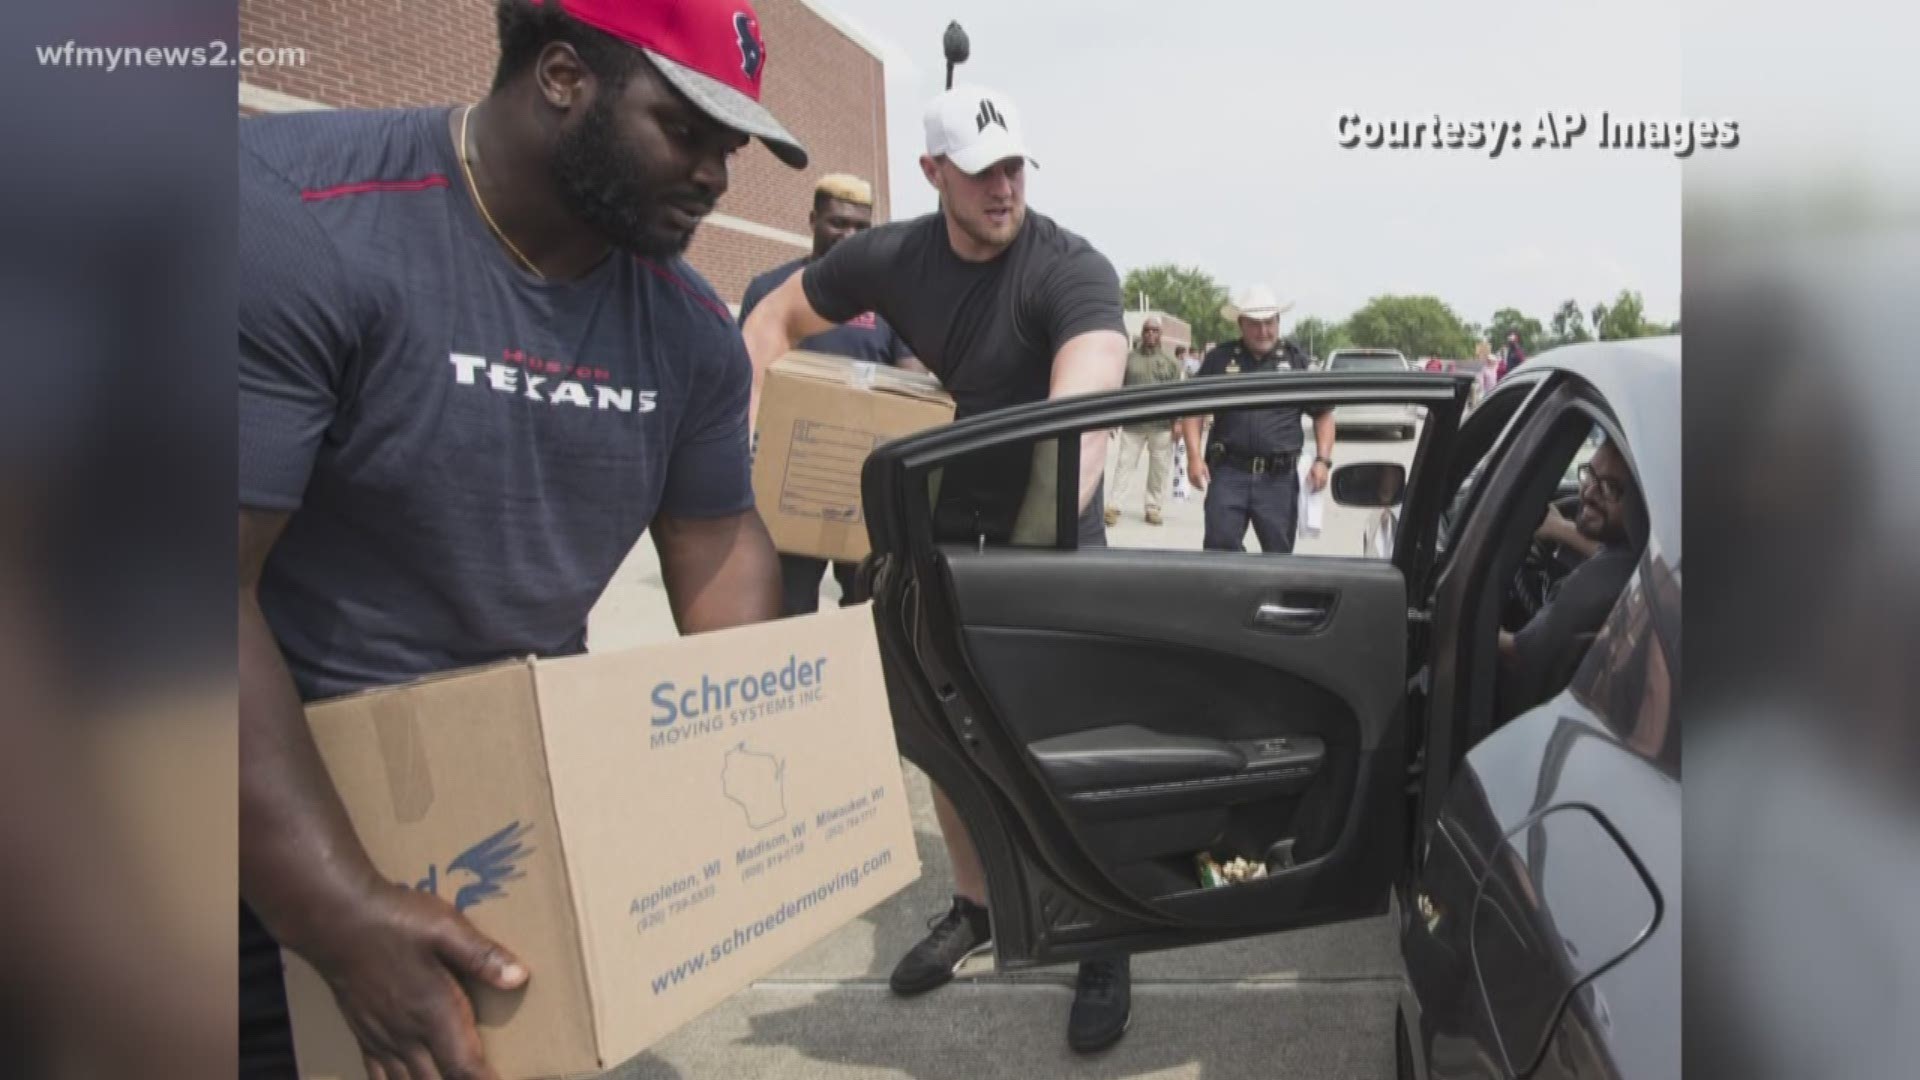 Reader plays defensive tackle for the Houston Texans, and he's well-known for his work in the community.